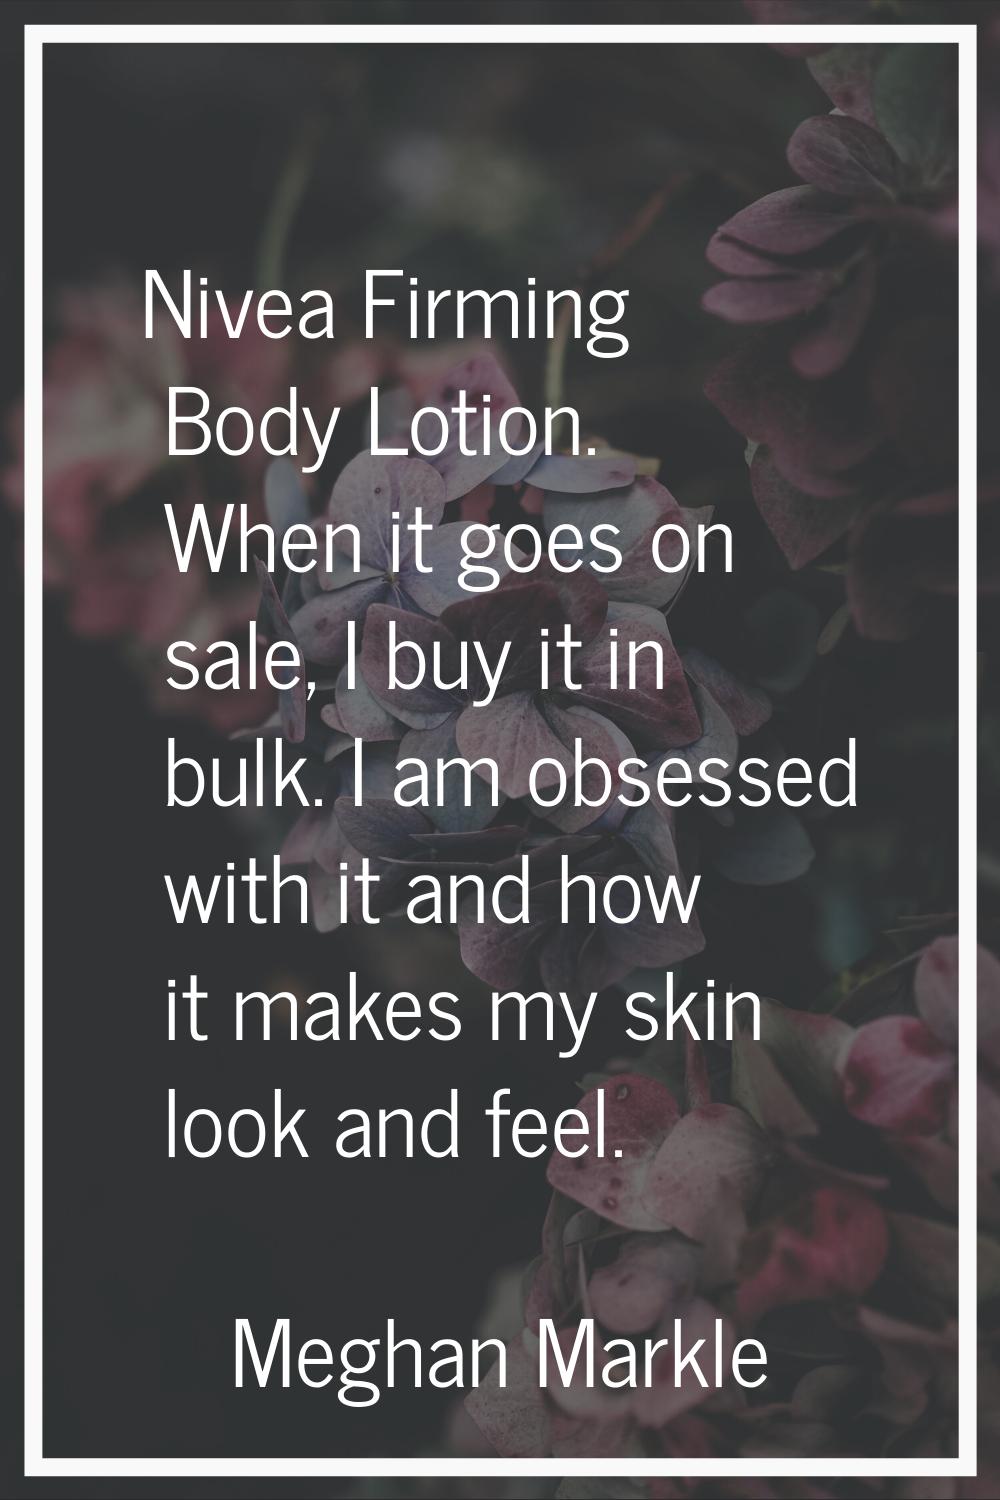 Nivea Firming Body Lotion. When it goes on sale, I buy it in bulk. I am obsessed with it and how it